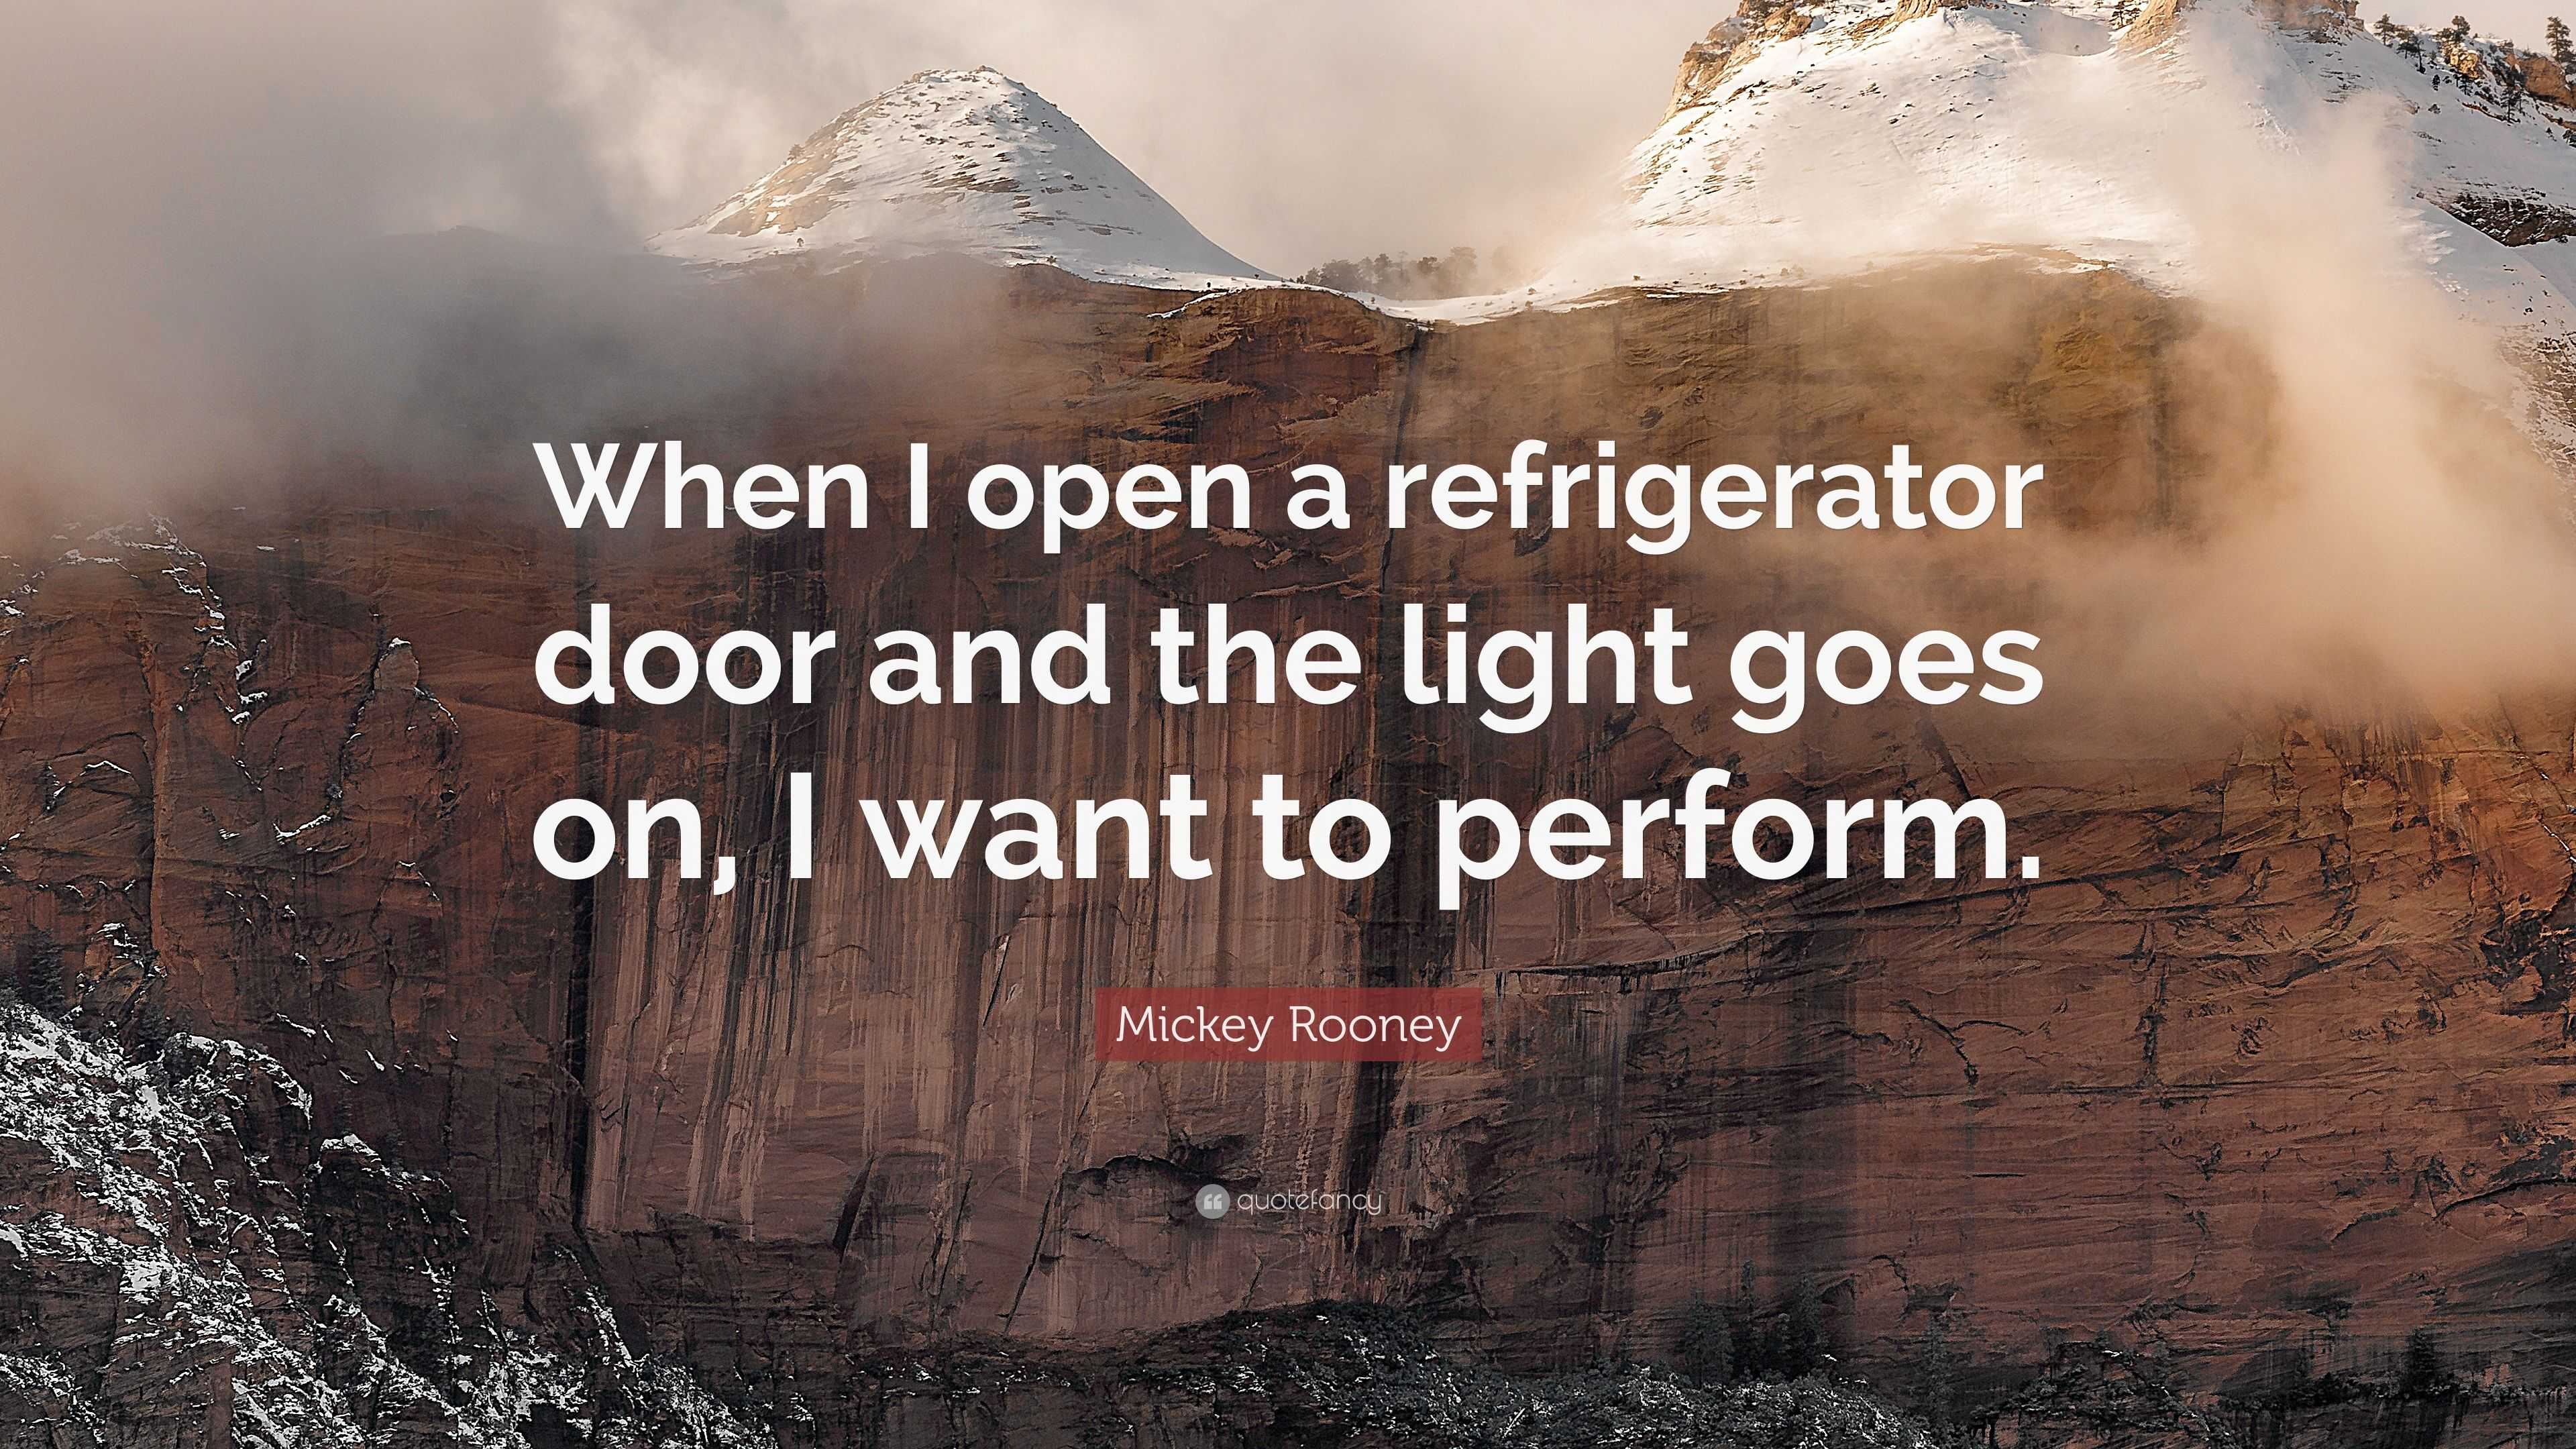 Mickey Rooney Quote: "When I open a refrigerator door and the light goes on, I want to perform ...